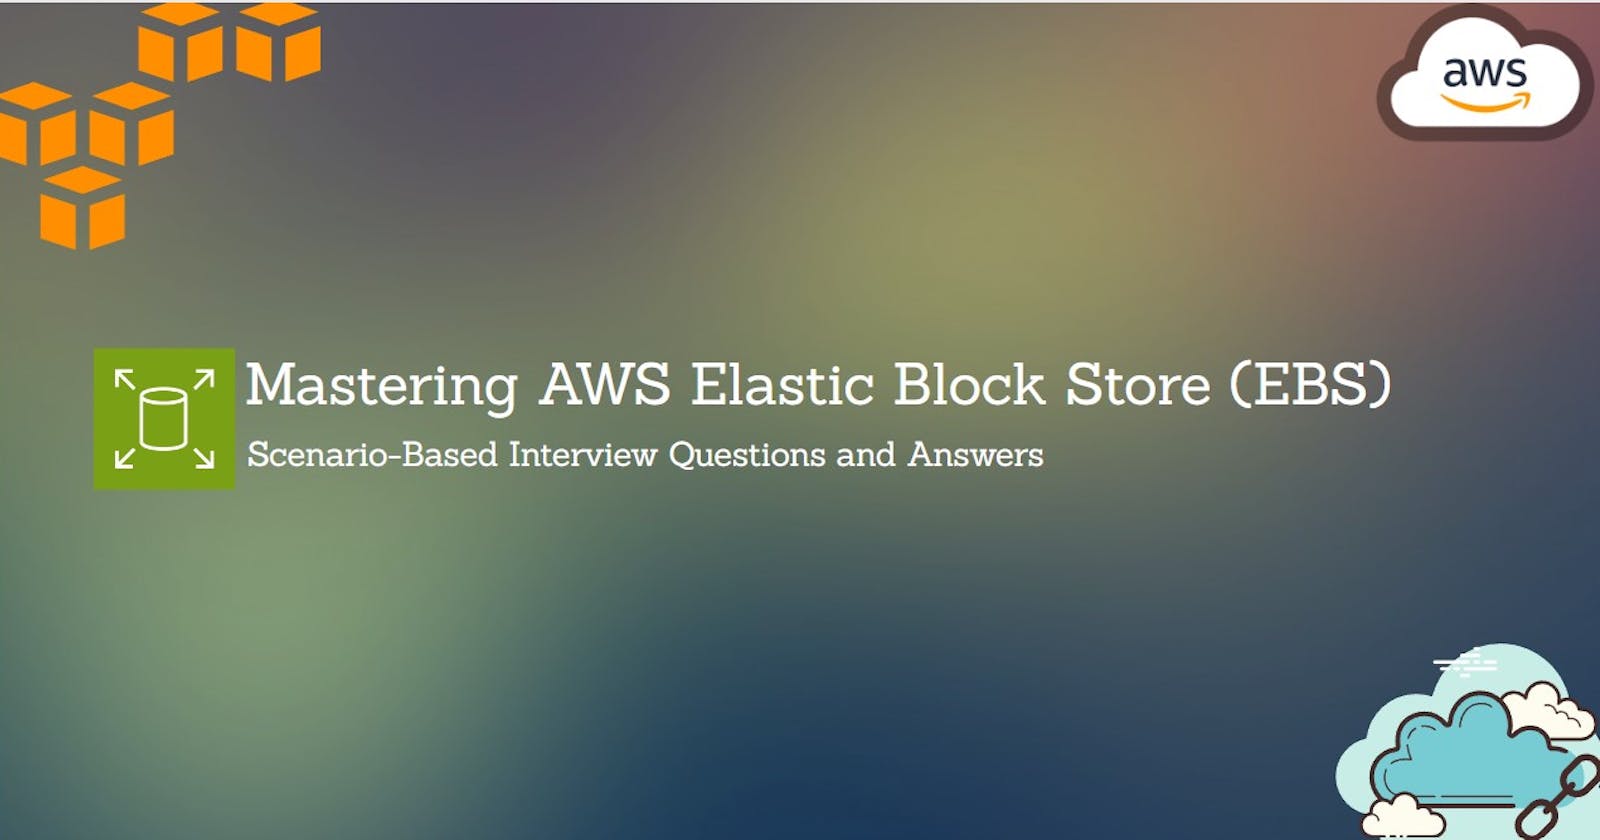 Mastering AWS Elastic Block Store (EBS): Scenario-Based Interview Questions and Answers